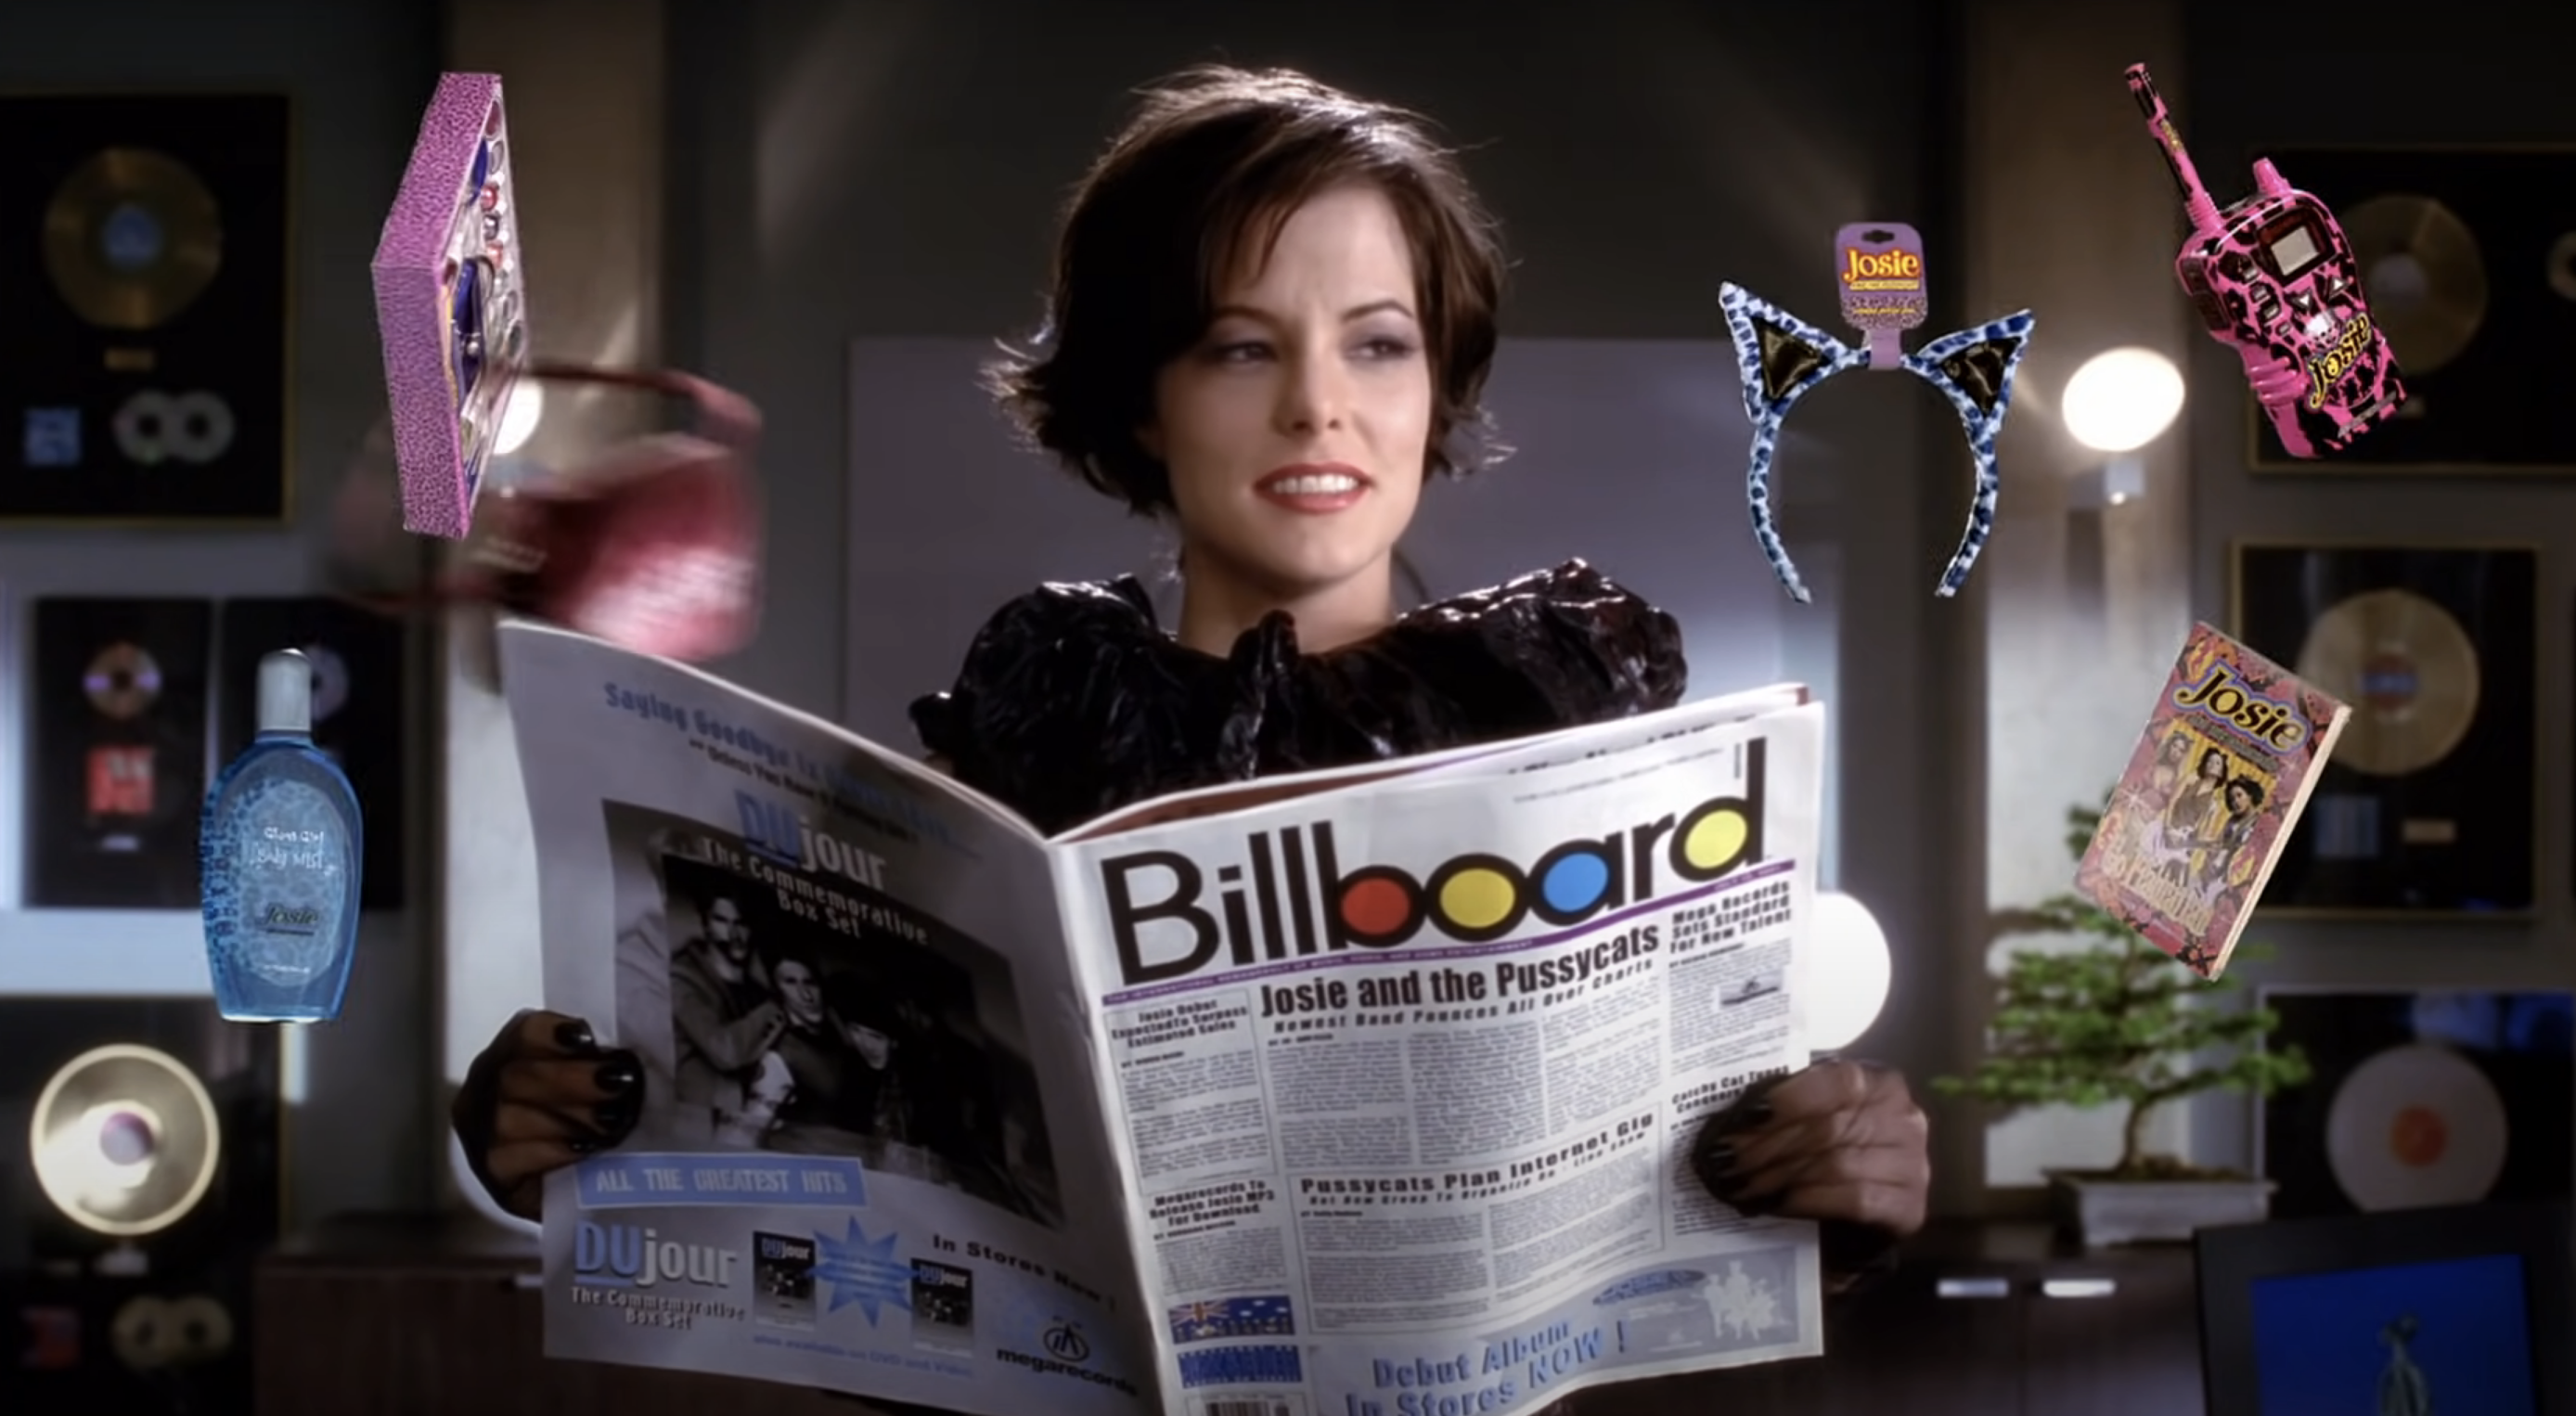 Fiona holding a copy of Billboard with a &quot;Josie and the Pussycats&quot; headline